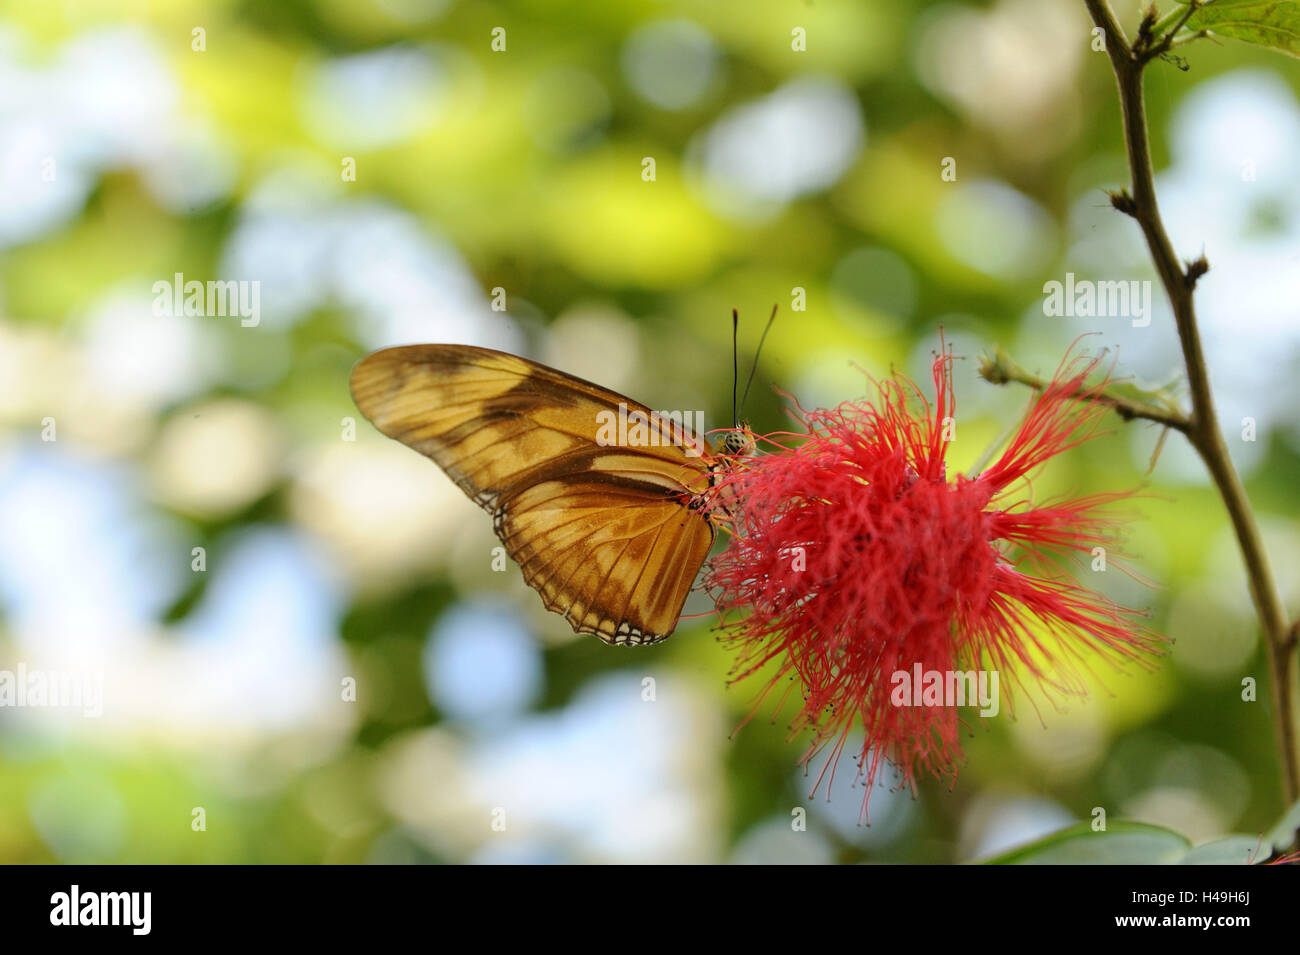 Butterfly, Flame or Julia butterfly, Dryas iulia, blossom, pollinating, Stock Photo